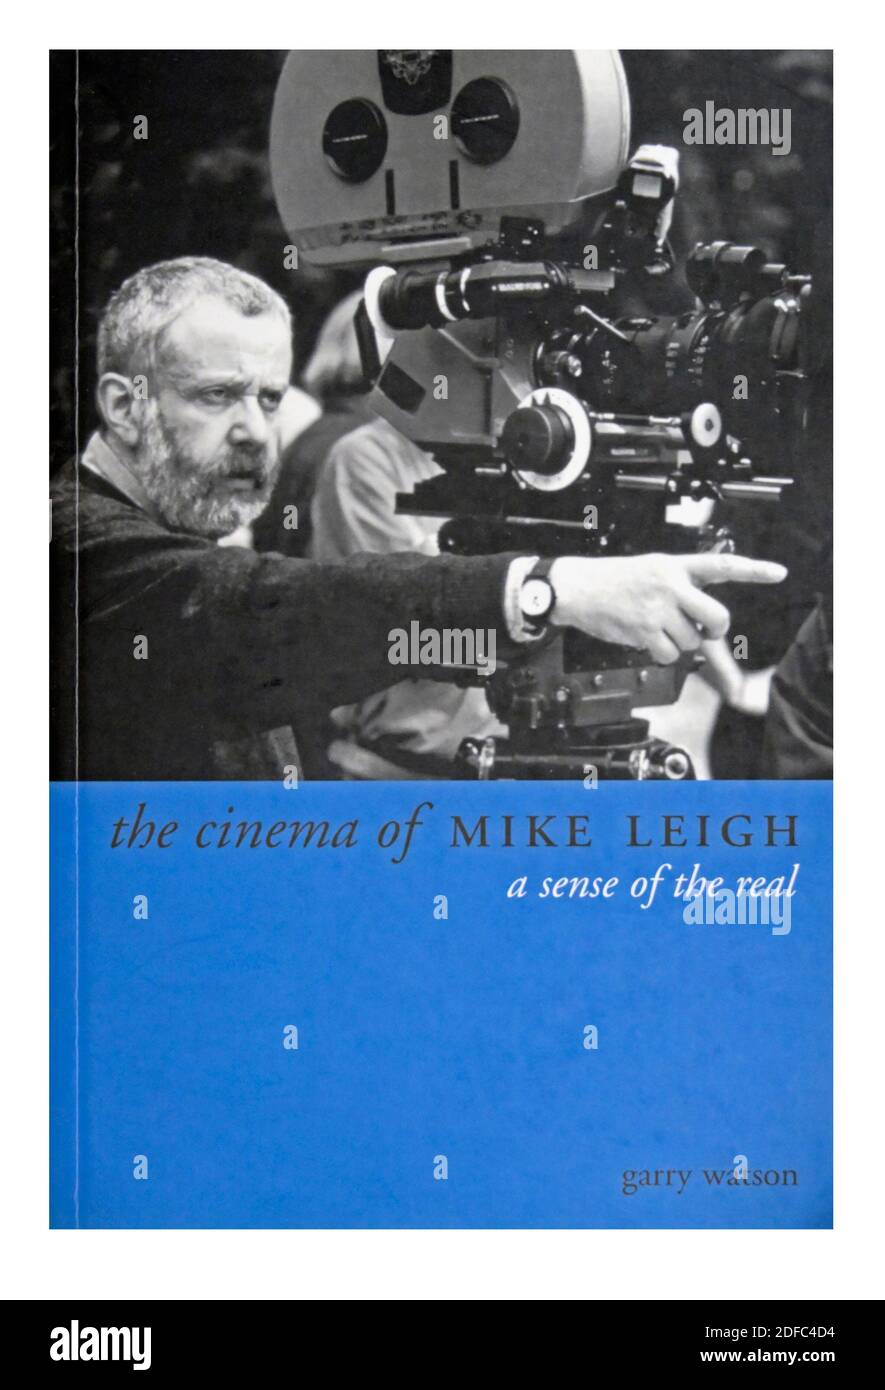 Buchcover 'The Cinema of Mike Leigh A Sense of the Real' von Garry Watson. Stockfoto